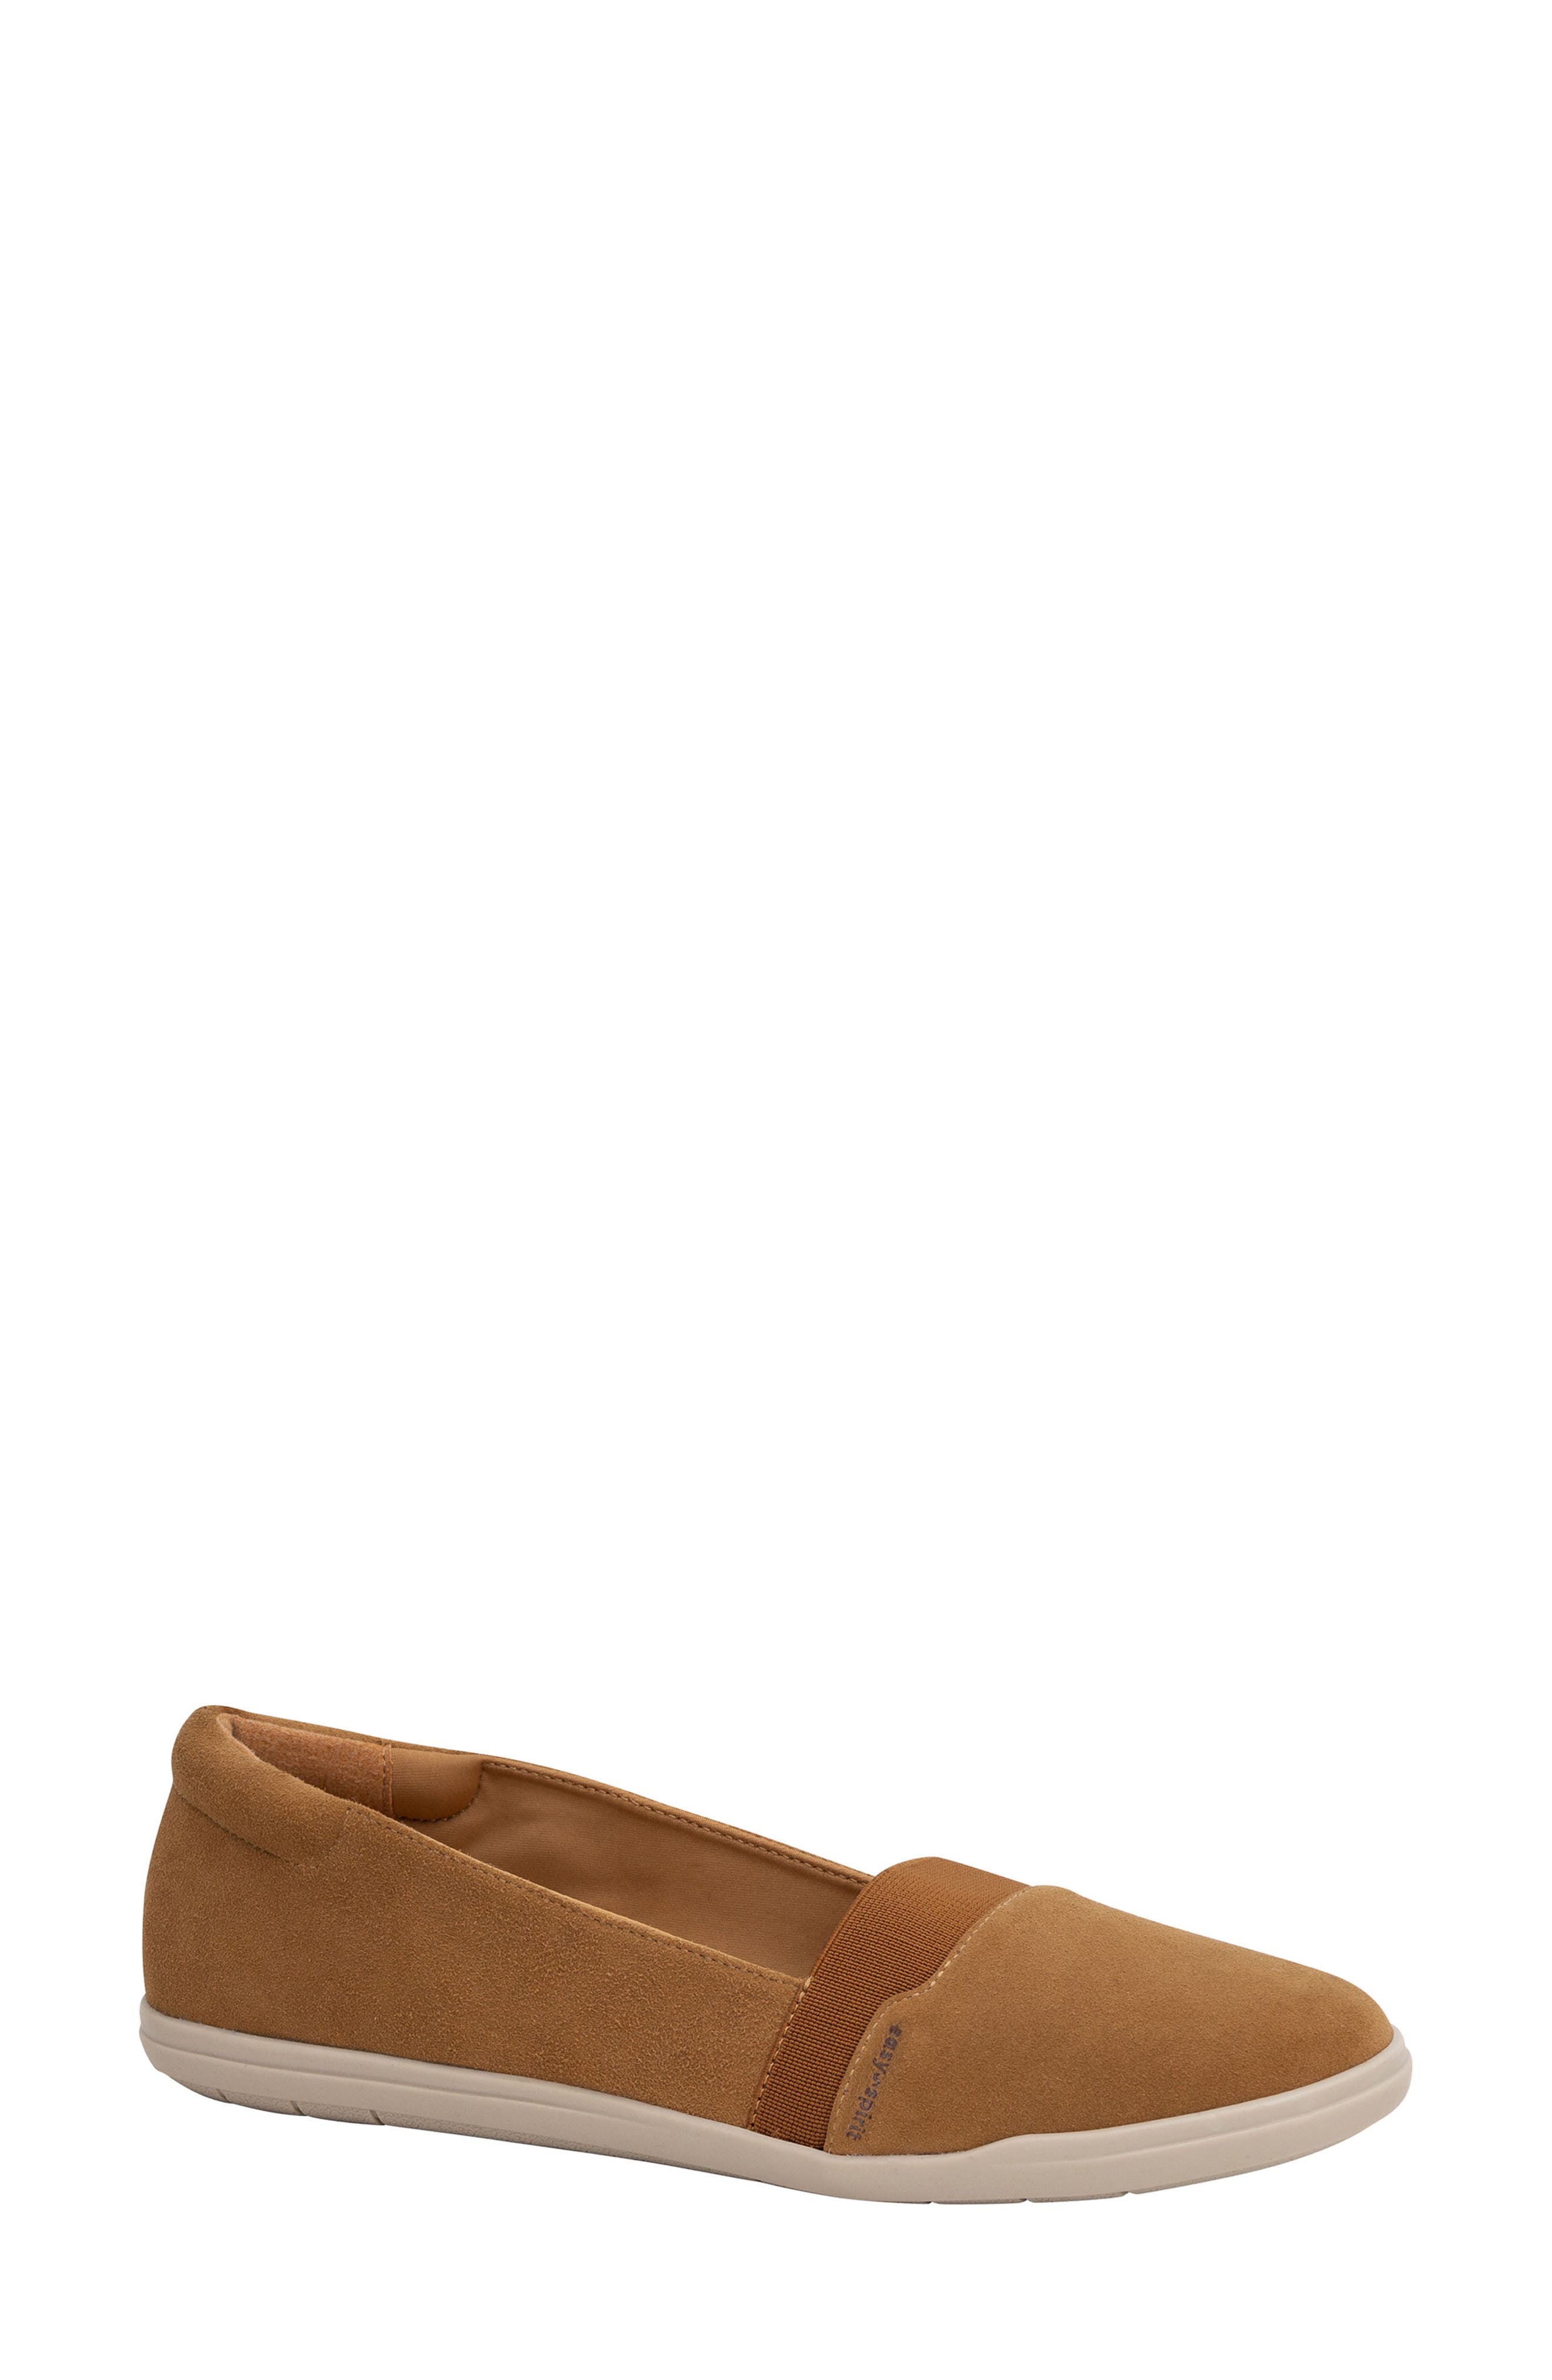 UPC 195608204858 product image for Easy Spirit Bounce Flat in Camel at Nordstrom, Size 6 | upcitemdb.com